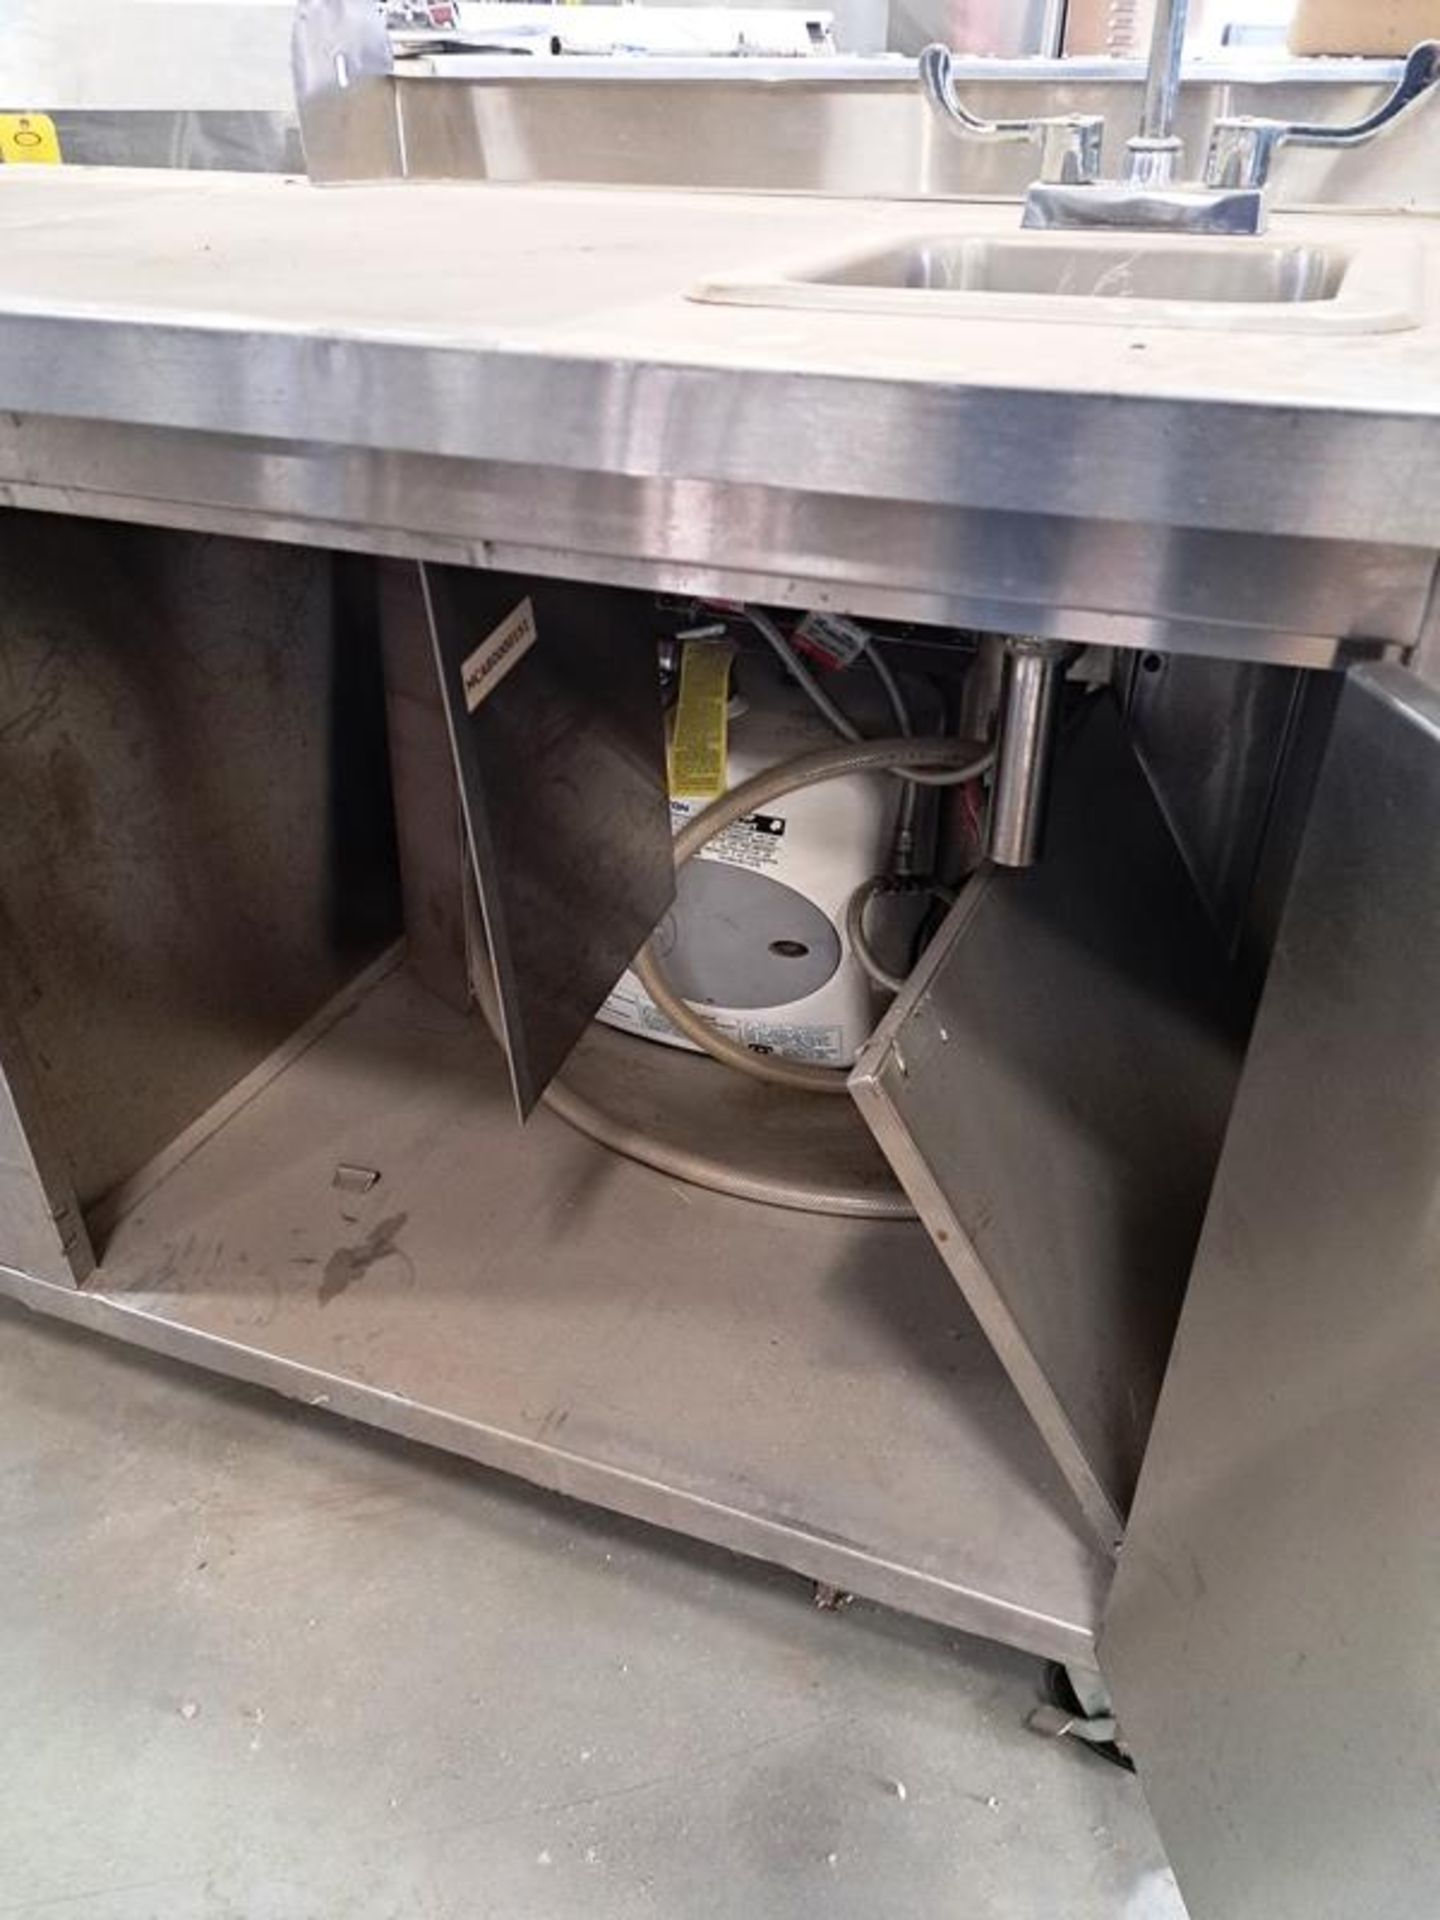 Refrigerated Prep Table with sink, 30" wide X 54" long X 30" deep (Required Loading Fee: $25.00) - Image 3 of 3